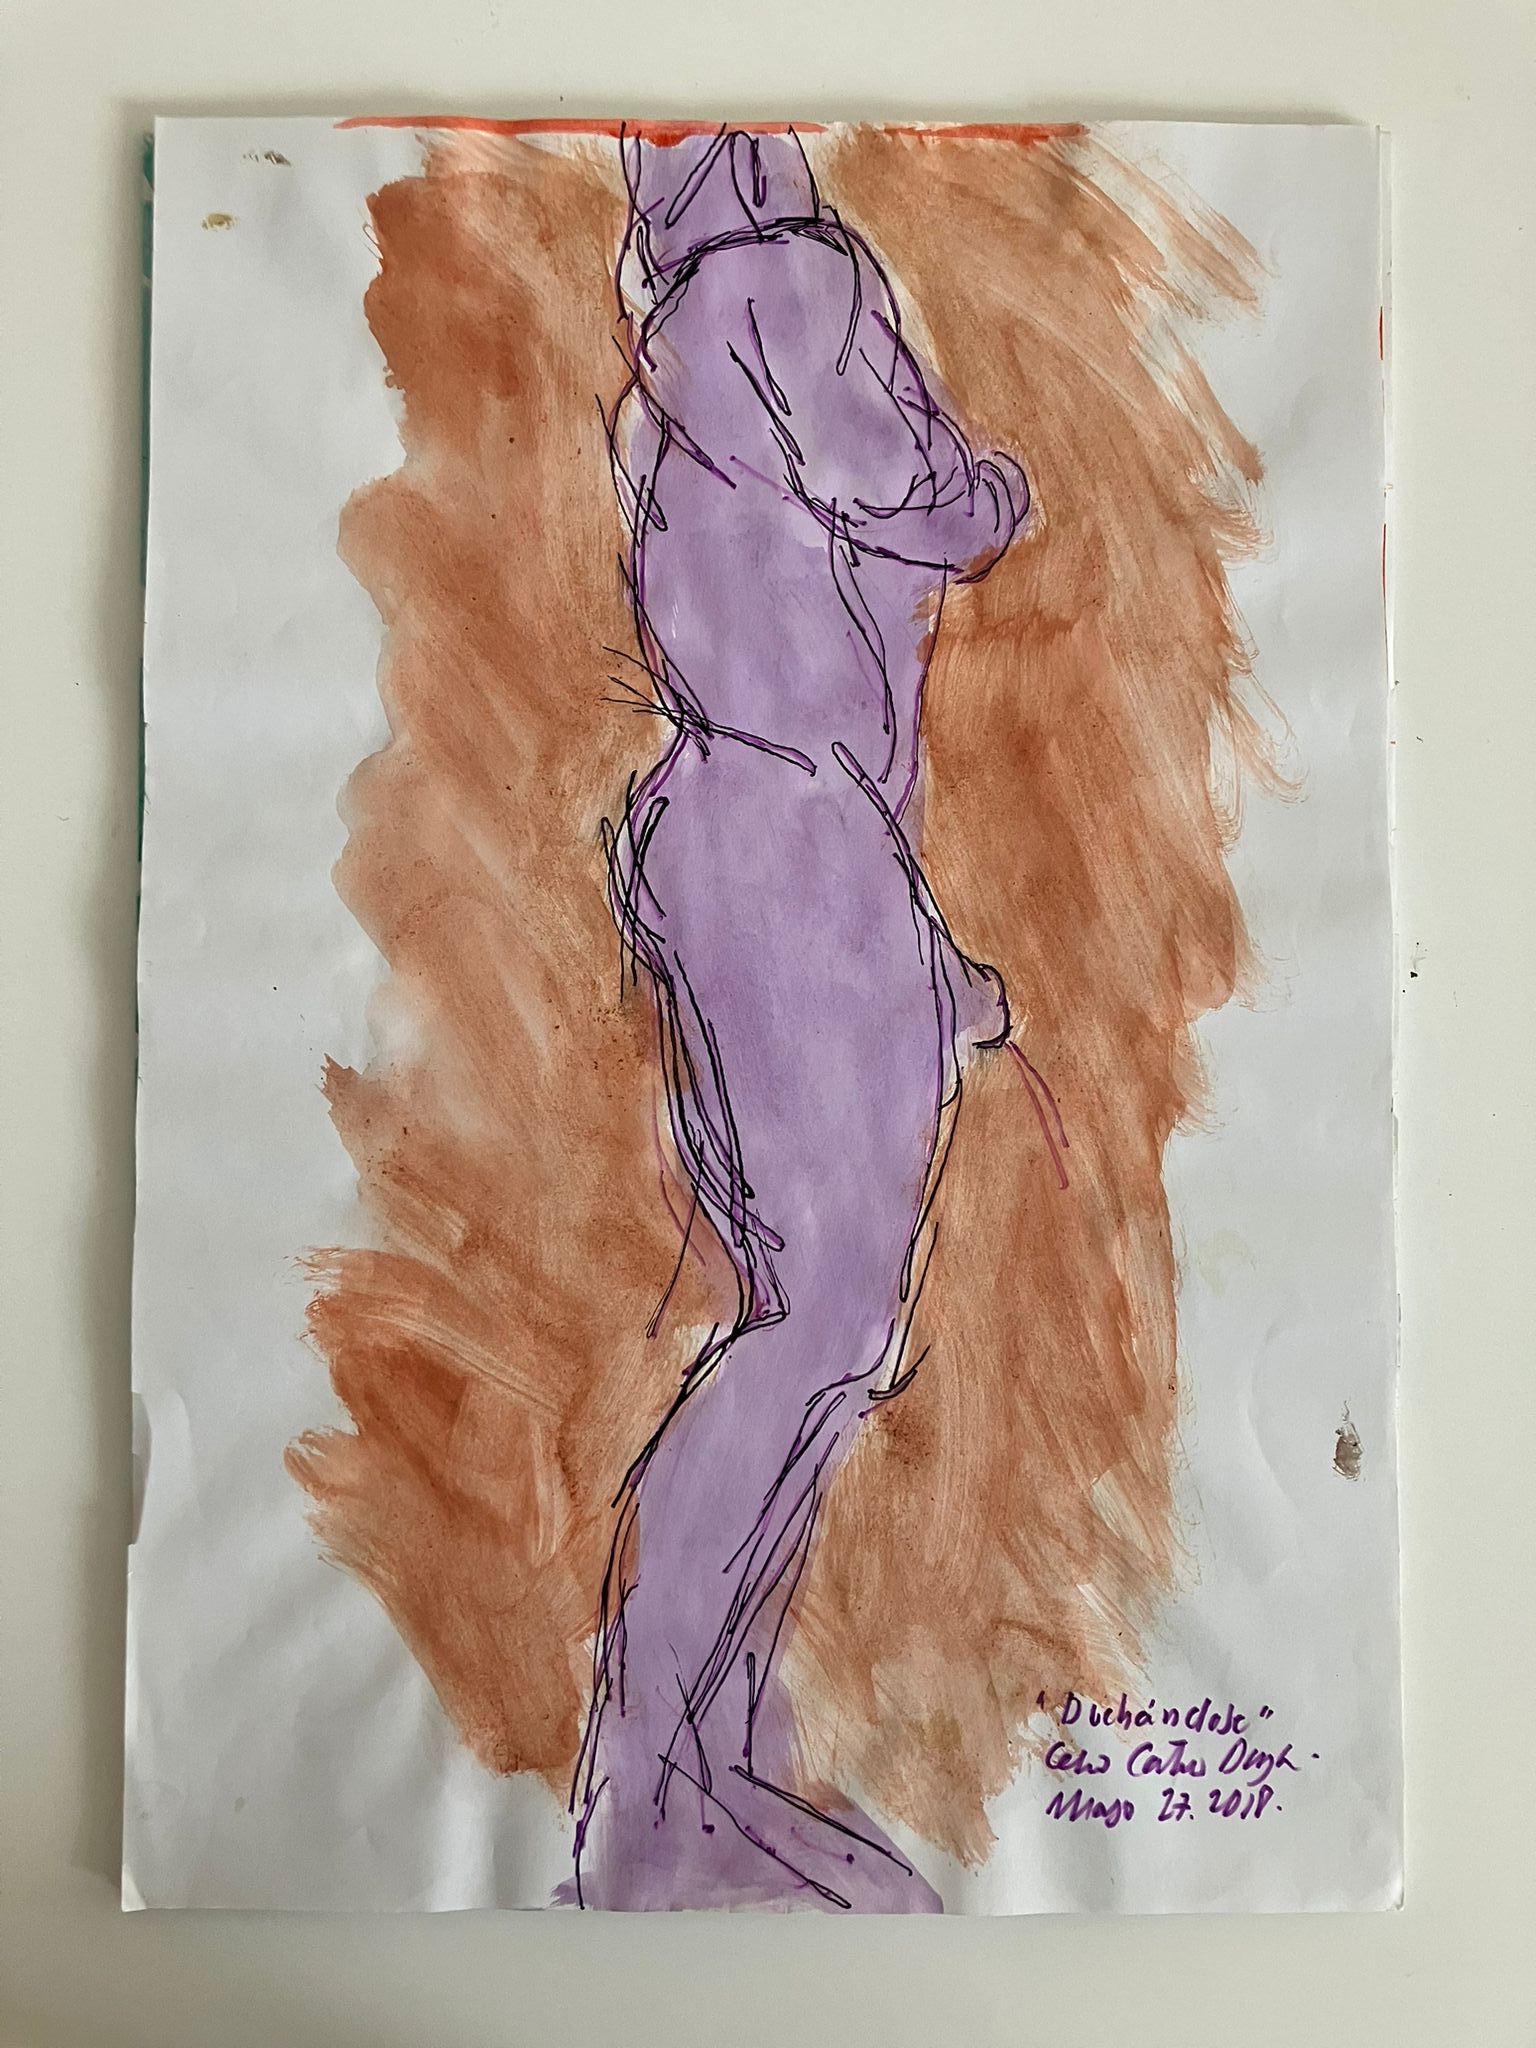  Duchándome Nude,  Series. Set of 4 Watercolors on archival paper. - Contemporary Art by Celso José Castro Daza